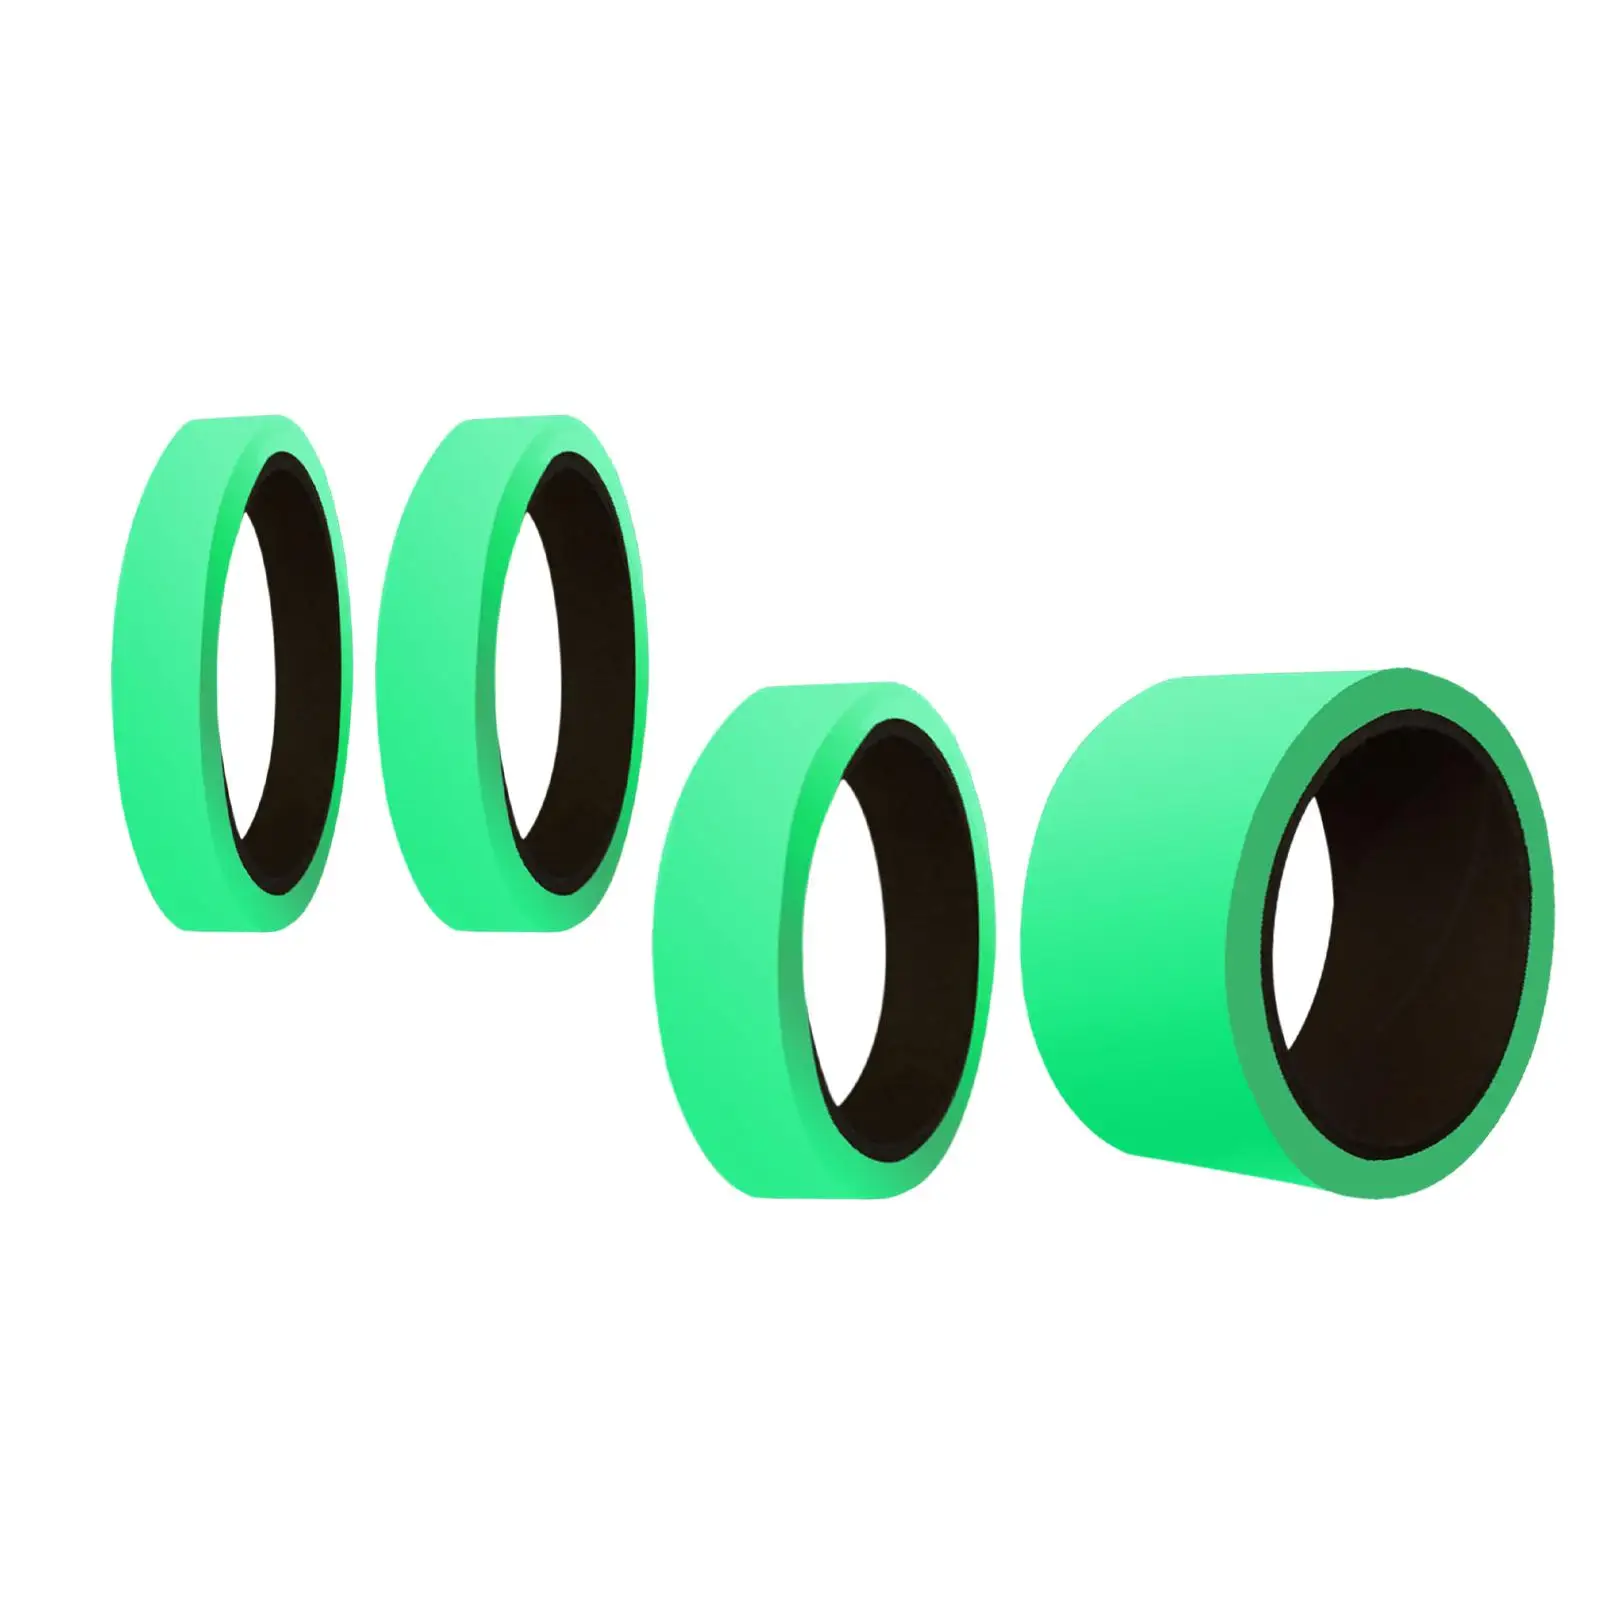 Glow in The Dark Tape 9.8ft Luminous Tape Green for Emergency Exit Night Decorations Theater Stage Outdoor Sports Home Marking